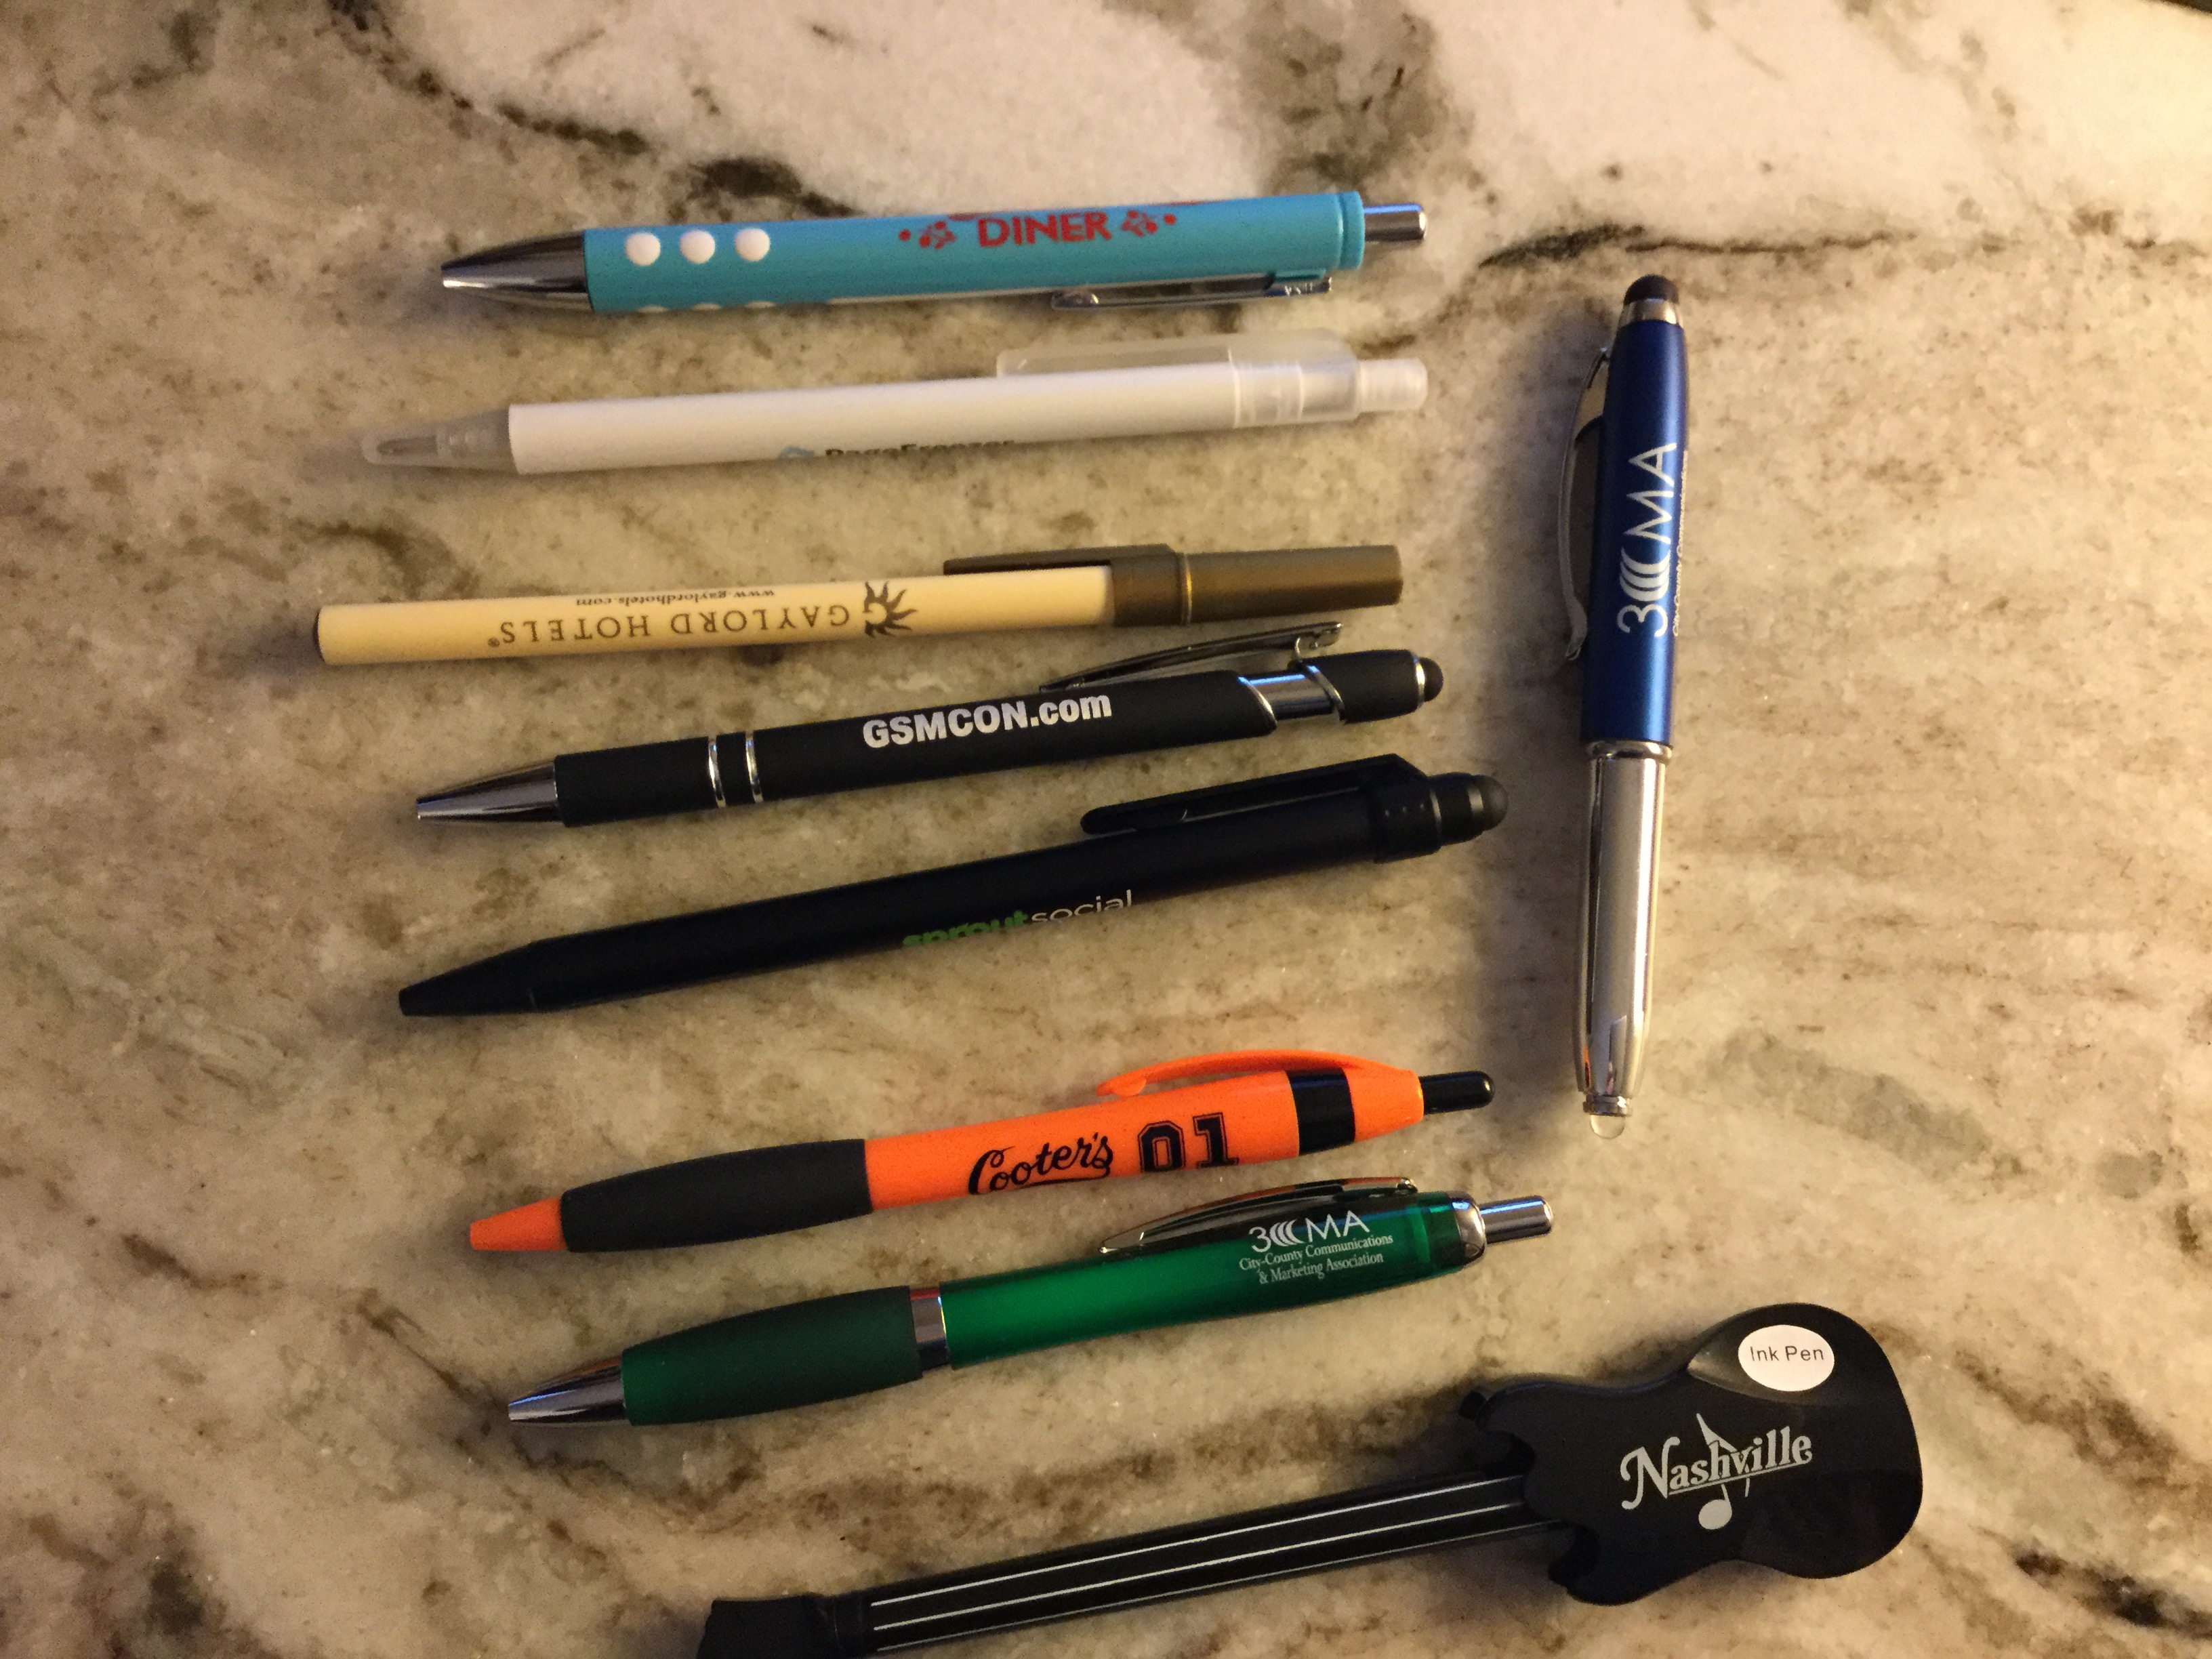 Pen/Pencil Review] Daiso 2 in 1 Pen and Stamp Set – Rhonda Eudaly